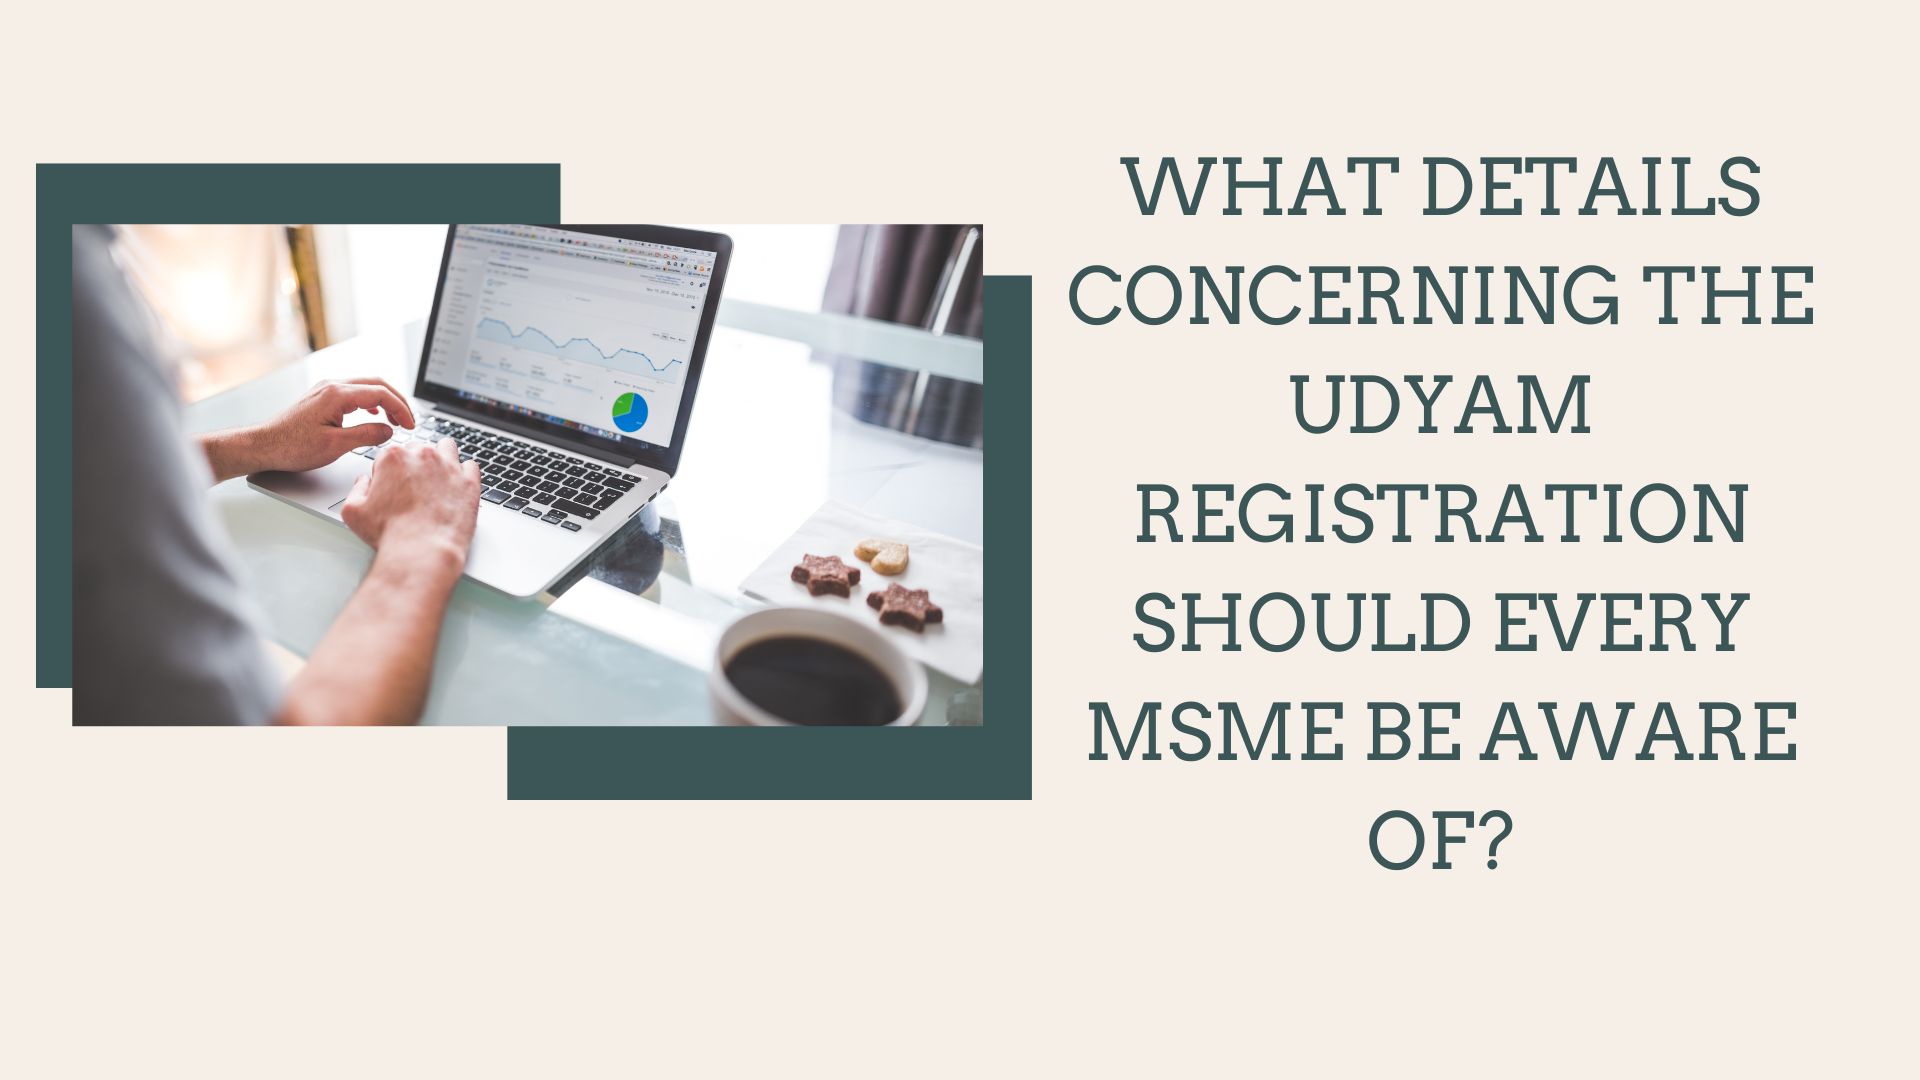 What details concerning the Udyam Registration should every MSME be aware of